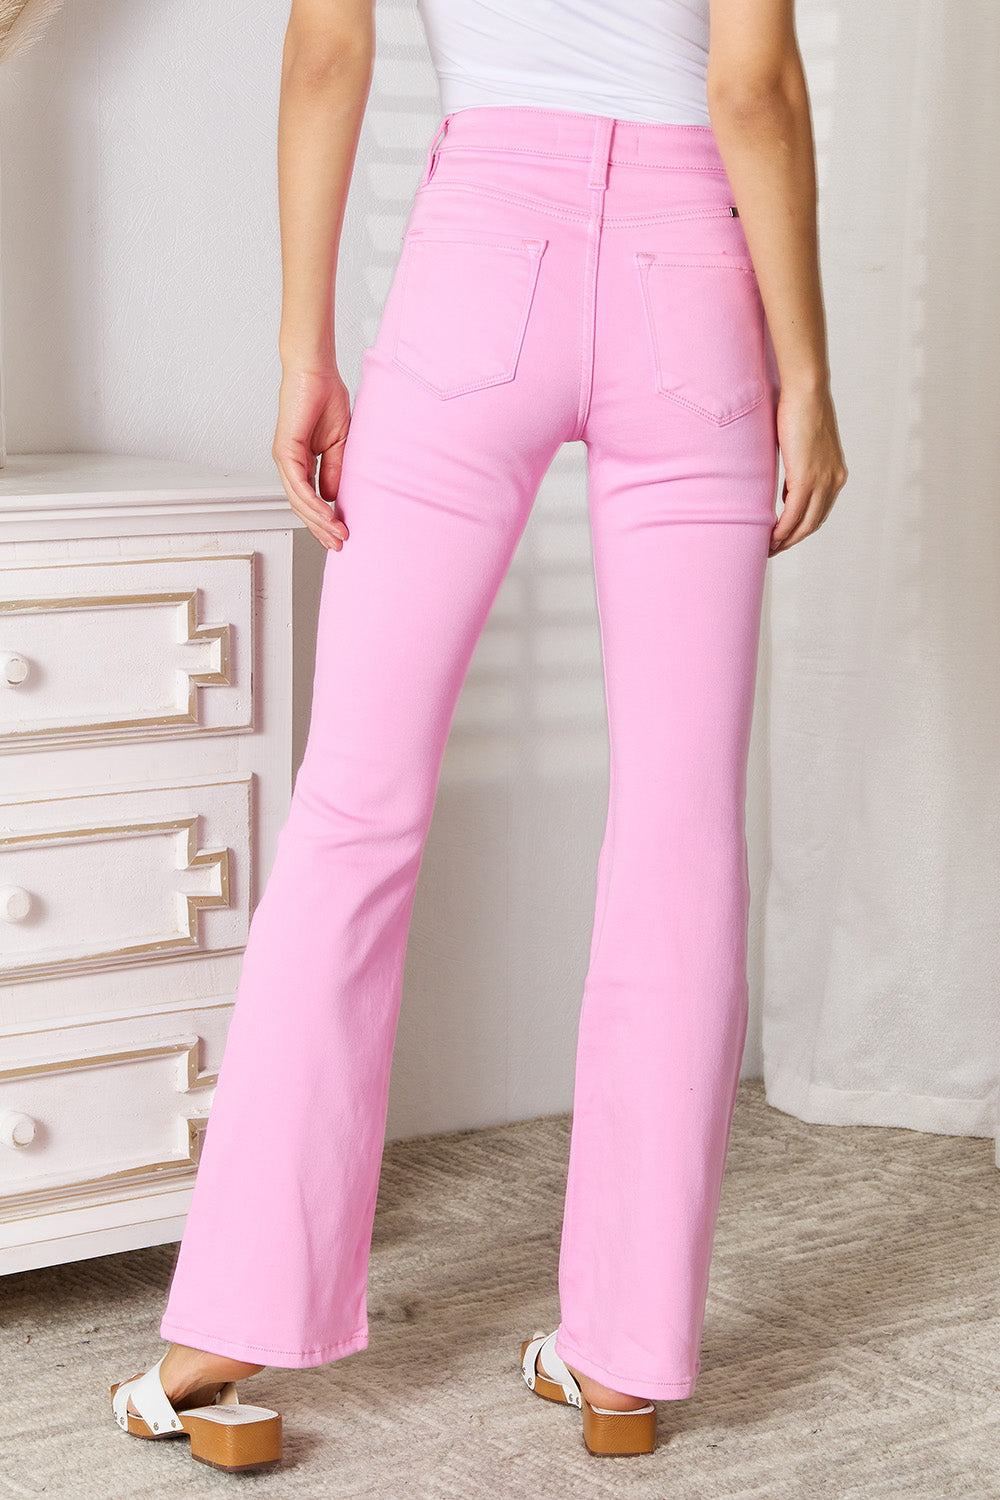 Kancan Jeans Bootcut - Pink - Inspired Eye Boutique